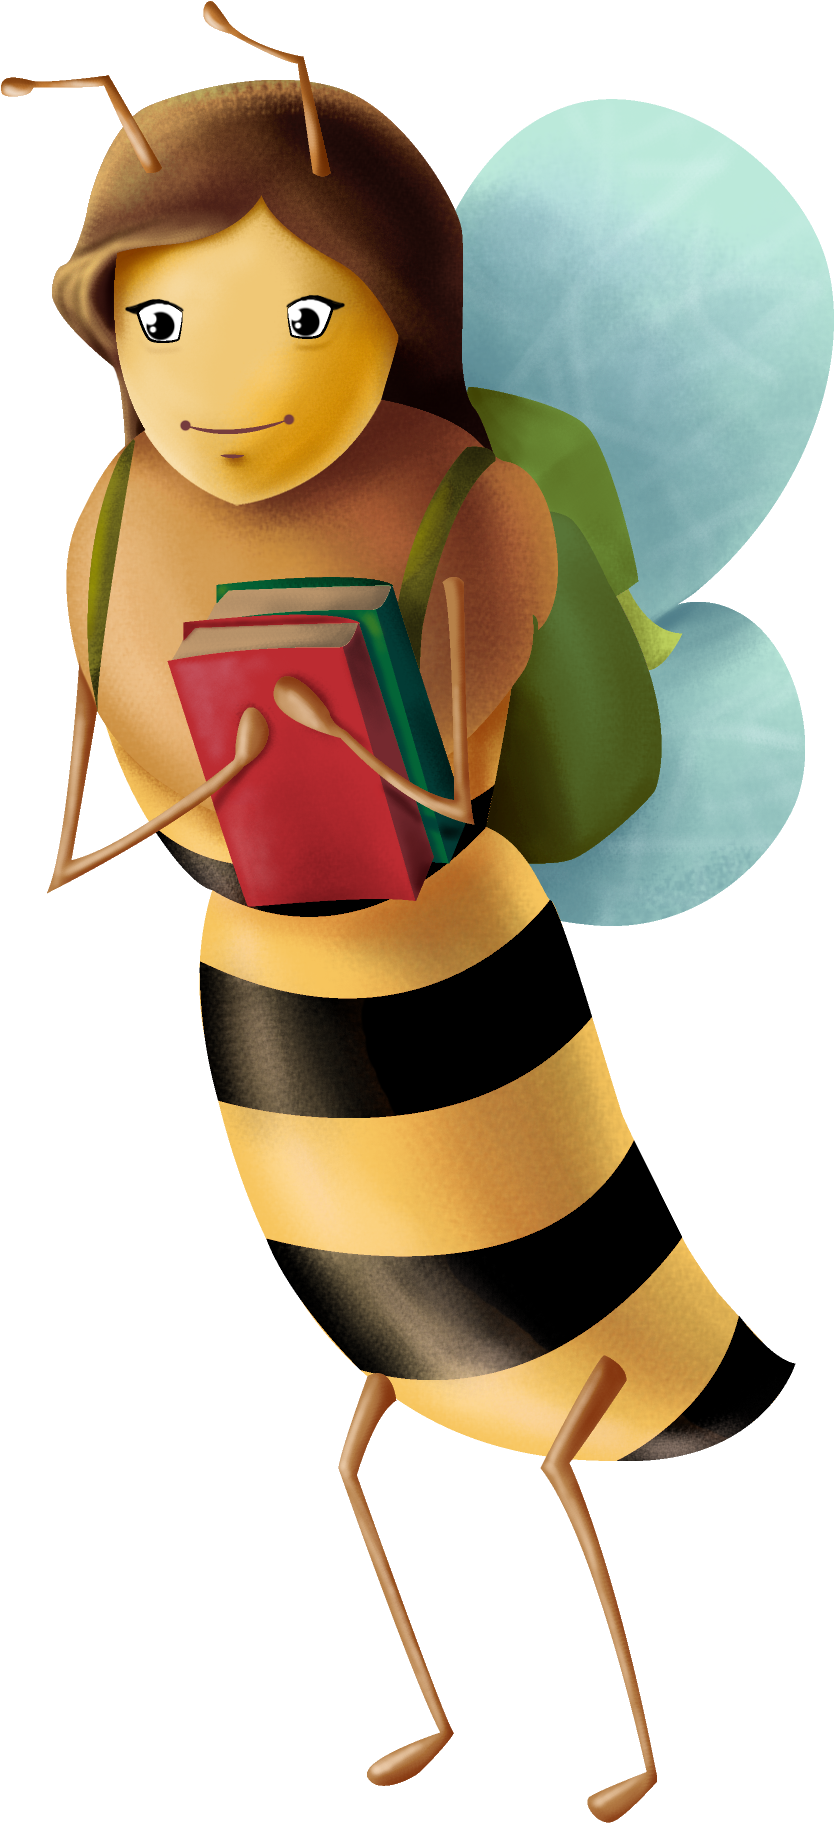 Bee Student Adopt Me On Www - Bee Student Adopt Me On Www (1779x2124)